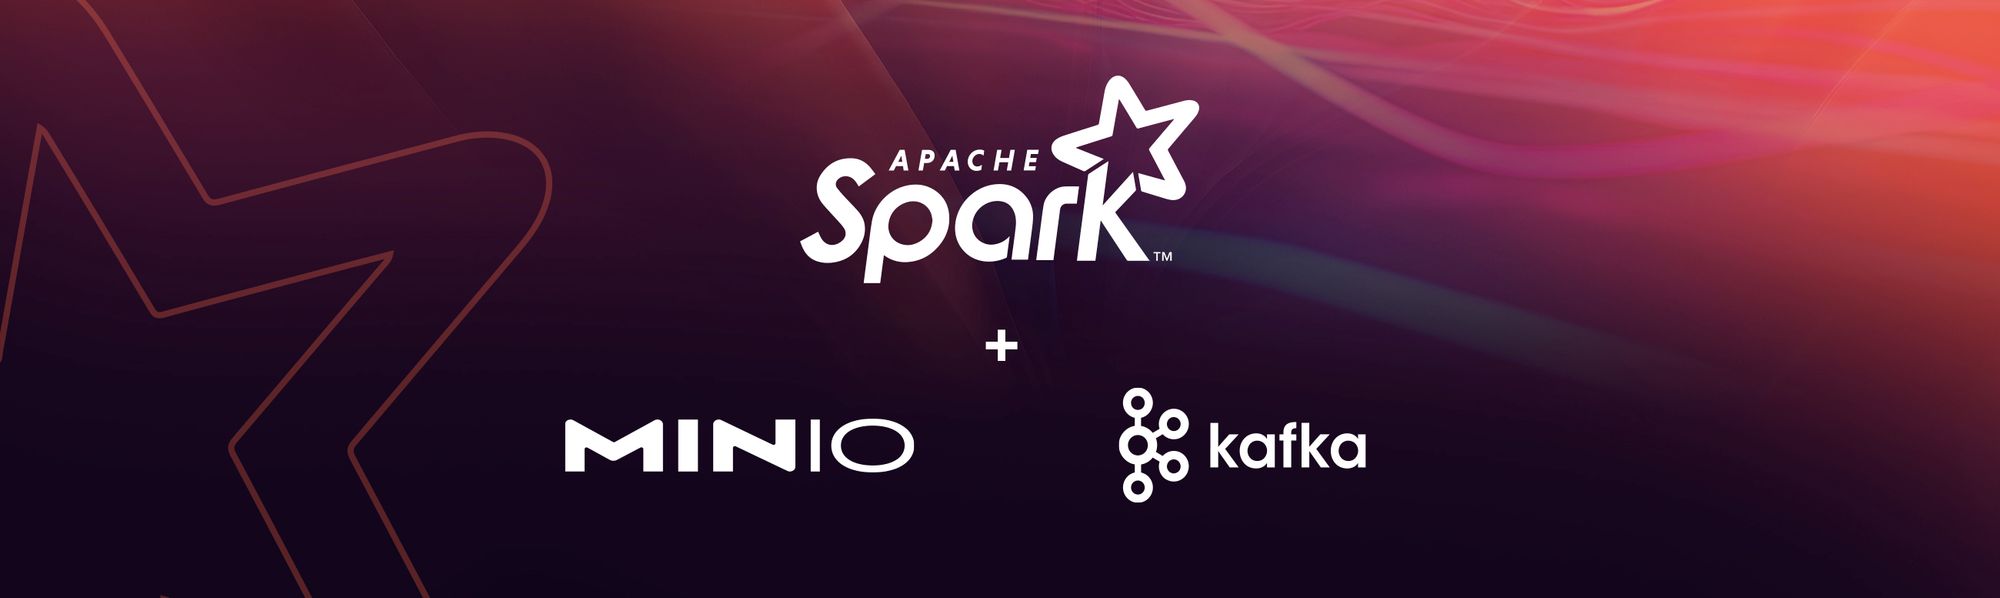 Spark Structured Streaming With Kafka and MinIO